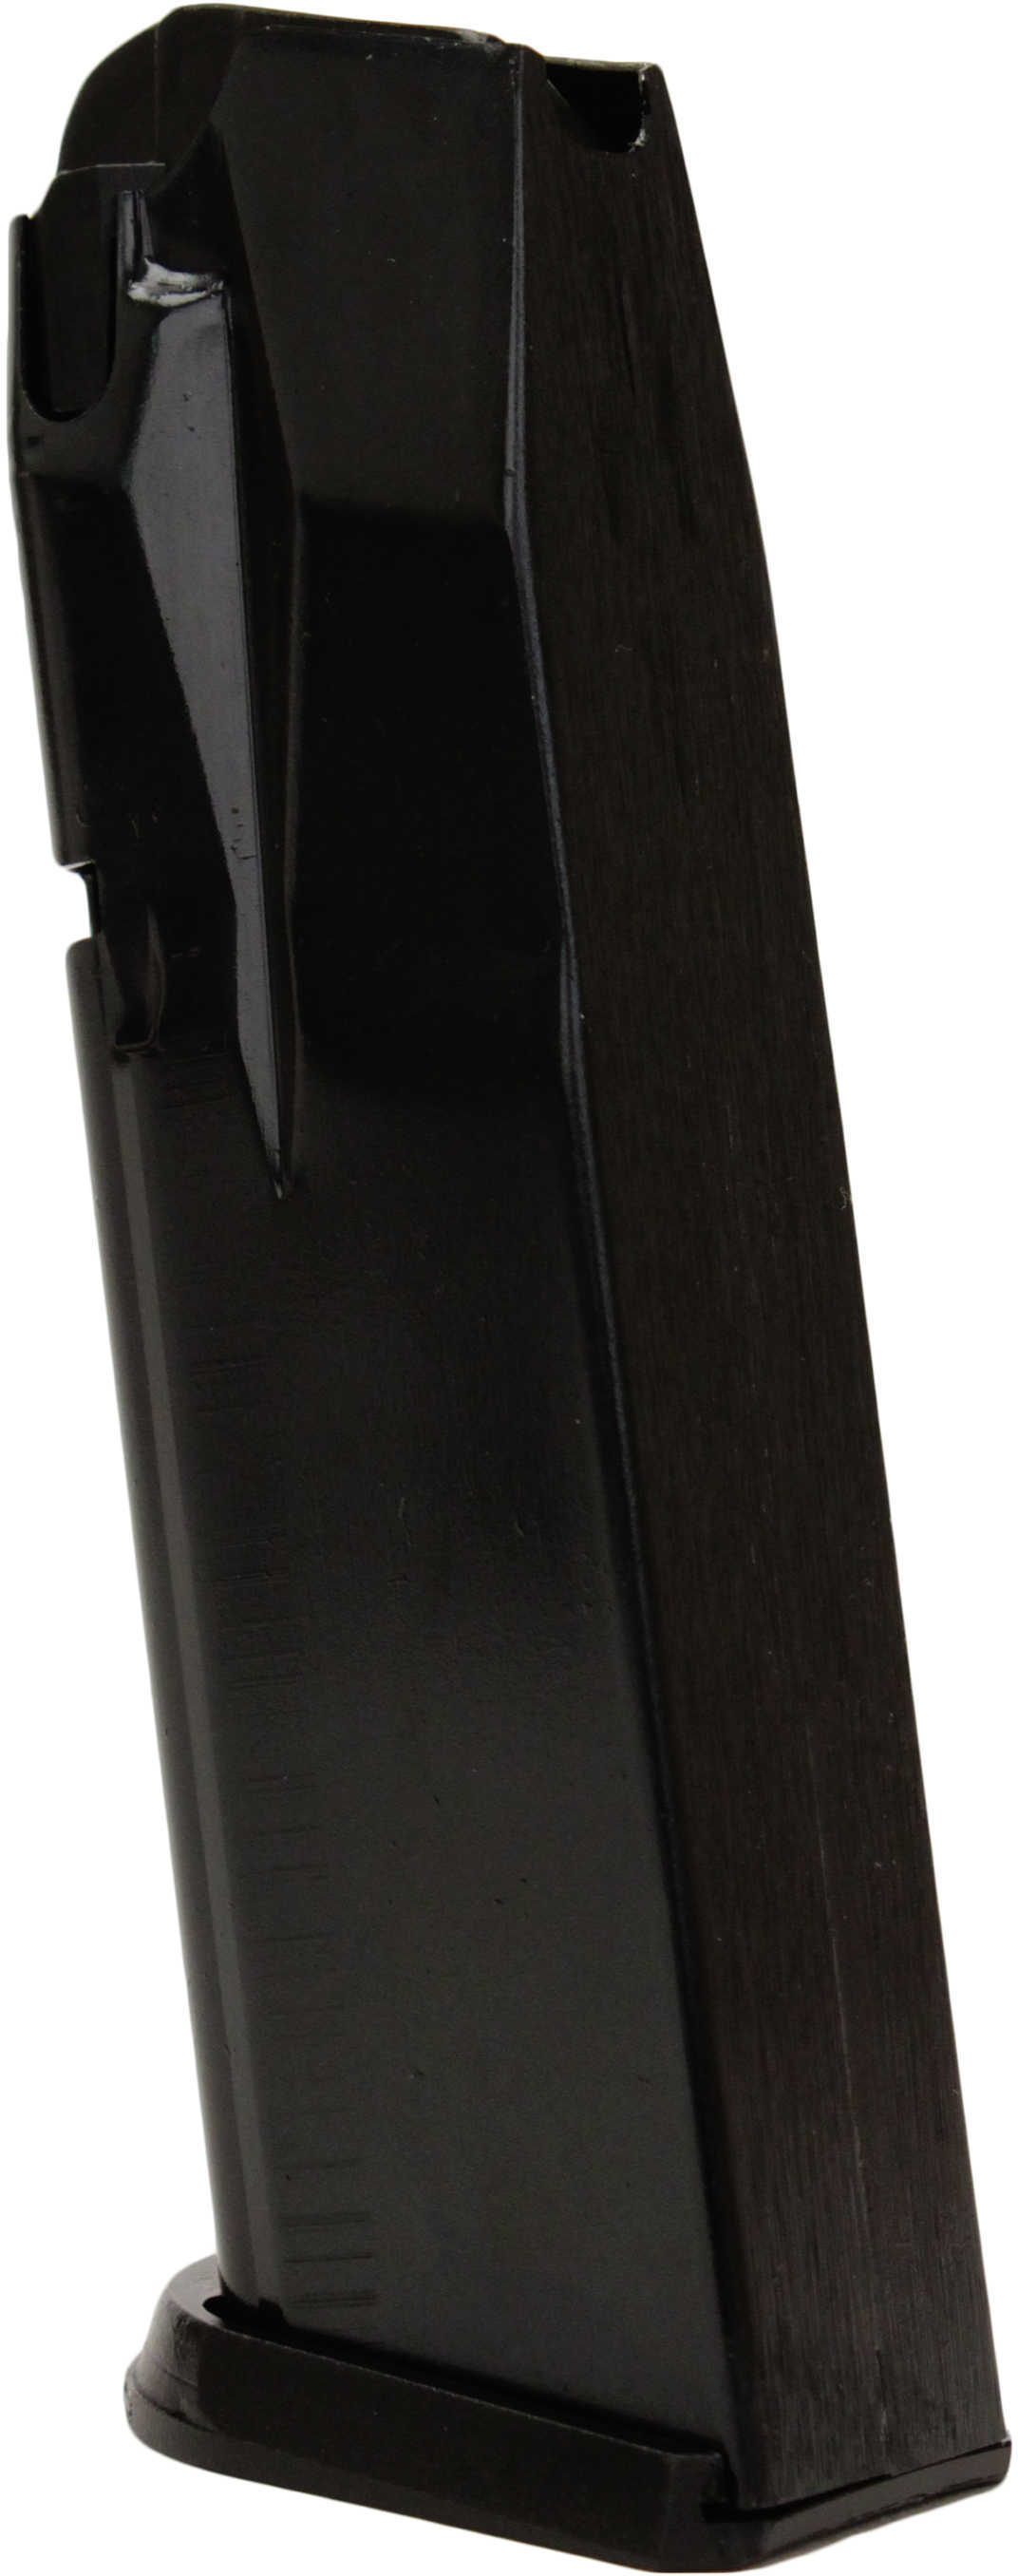 ProMag Sig P229 Magazine 40 S&W and .357 12 Round Blue Steel Model: SIG-A2